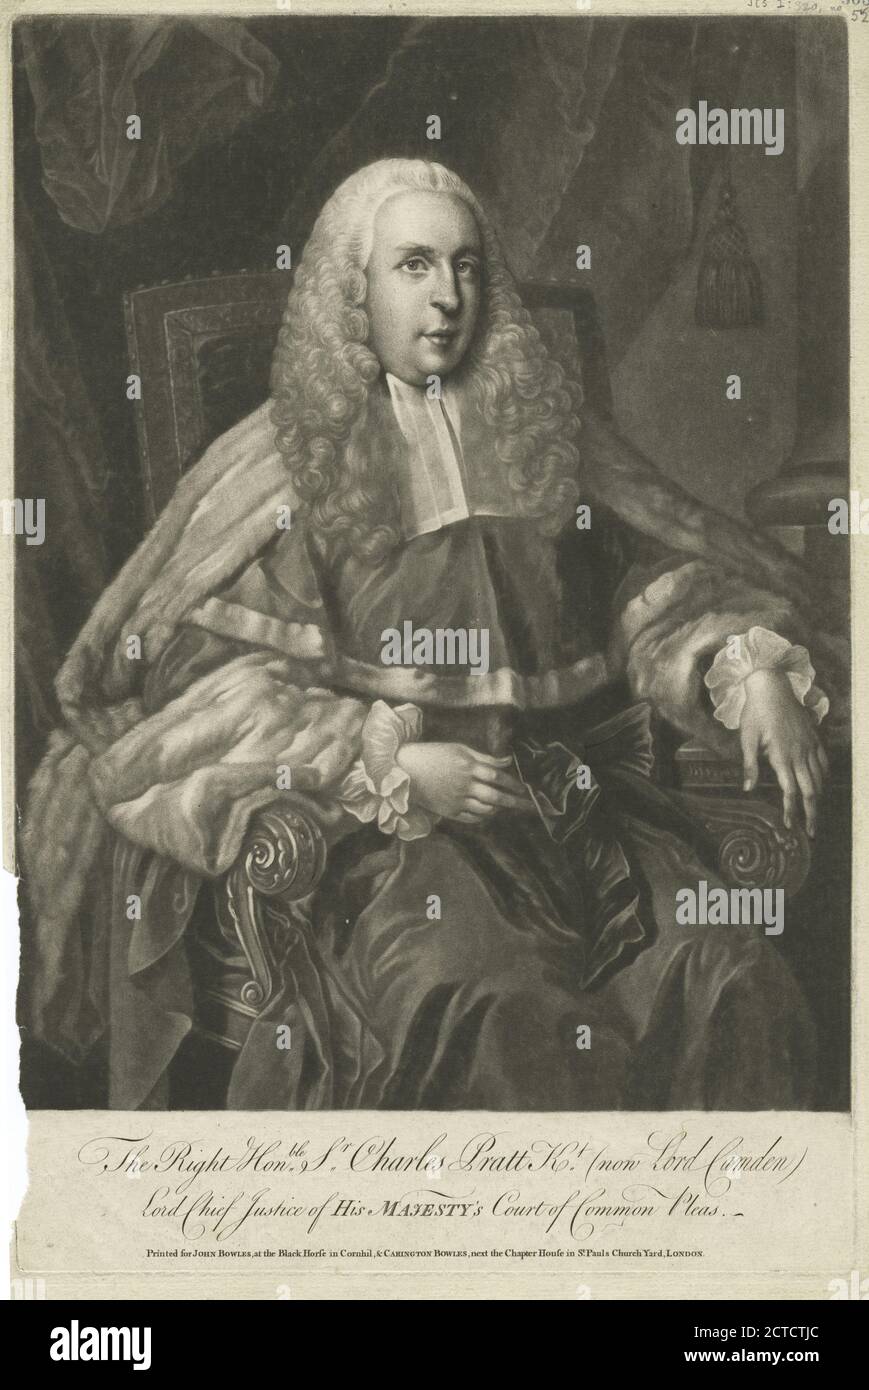 The Right Honble. Sr. Charles Pratt Kt. (now Lord Camden), Lord Chief Justice of His Majesty's Court of Common Pleas., still image, Prints, 1777 - 1890 Stock Photo